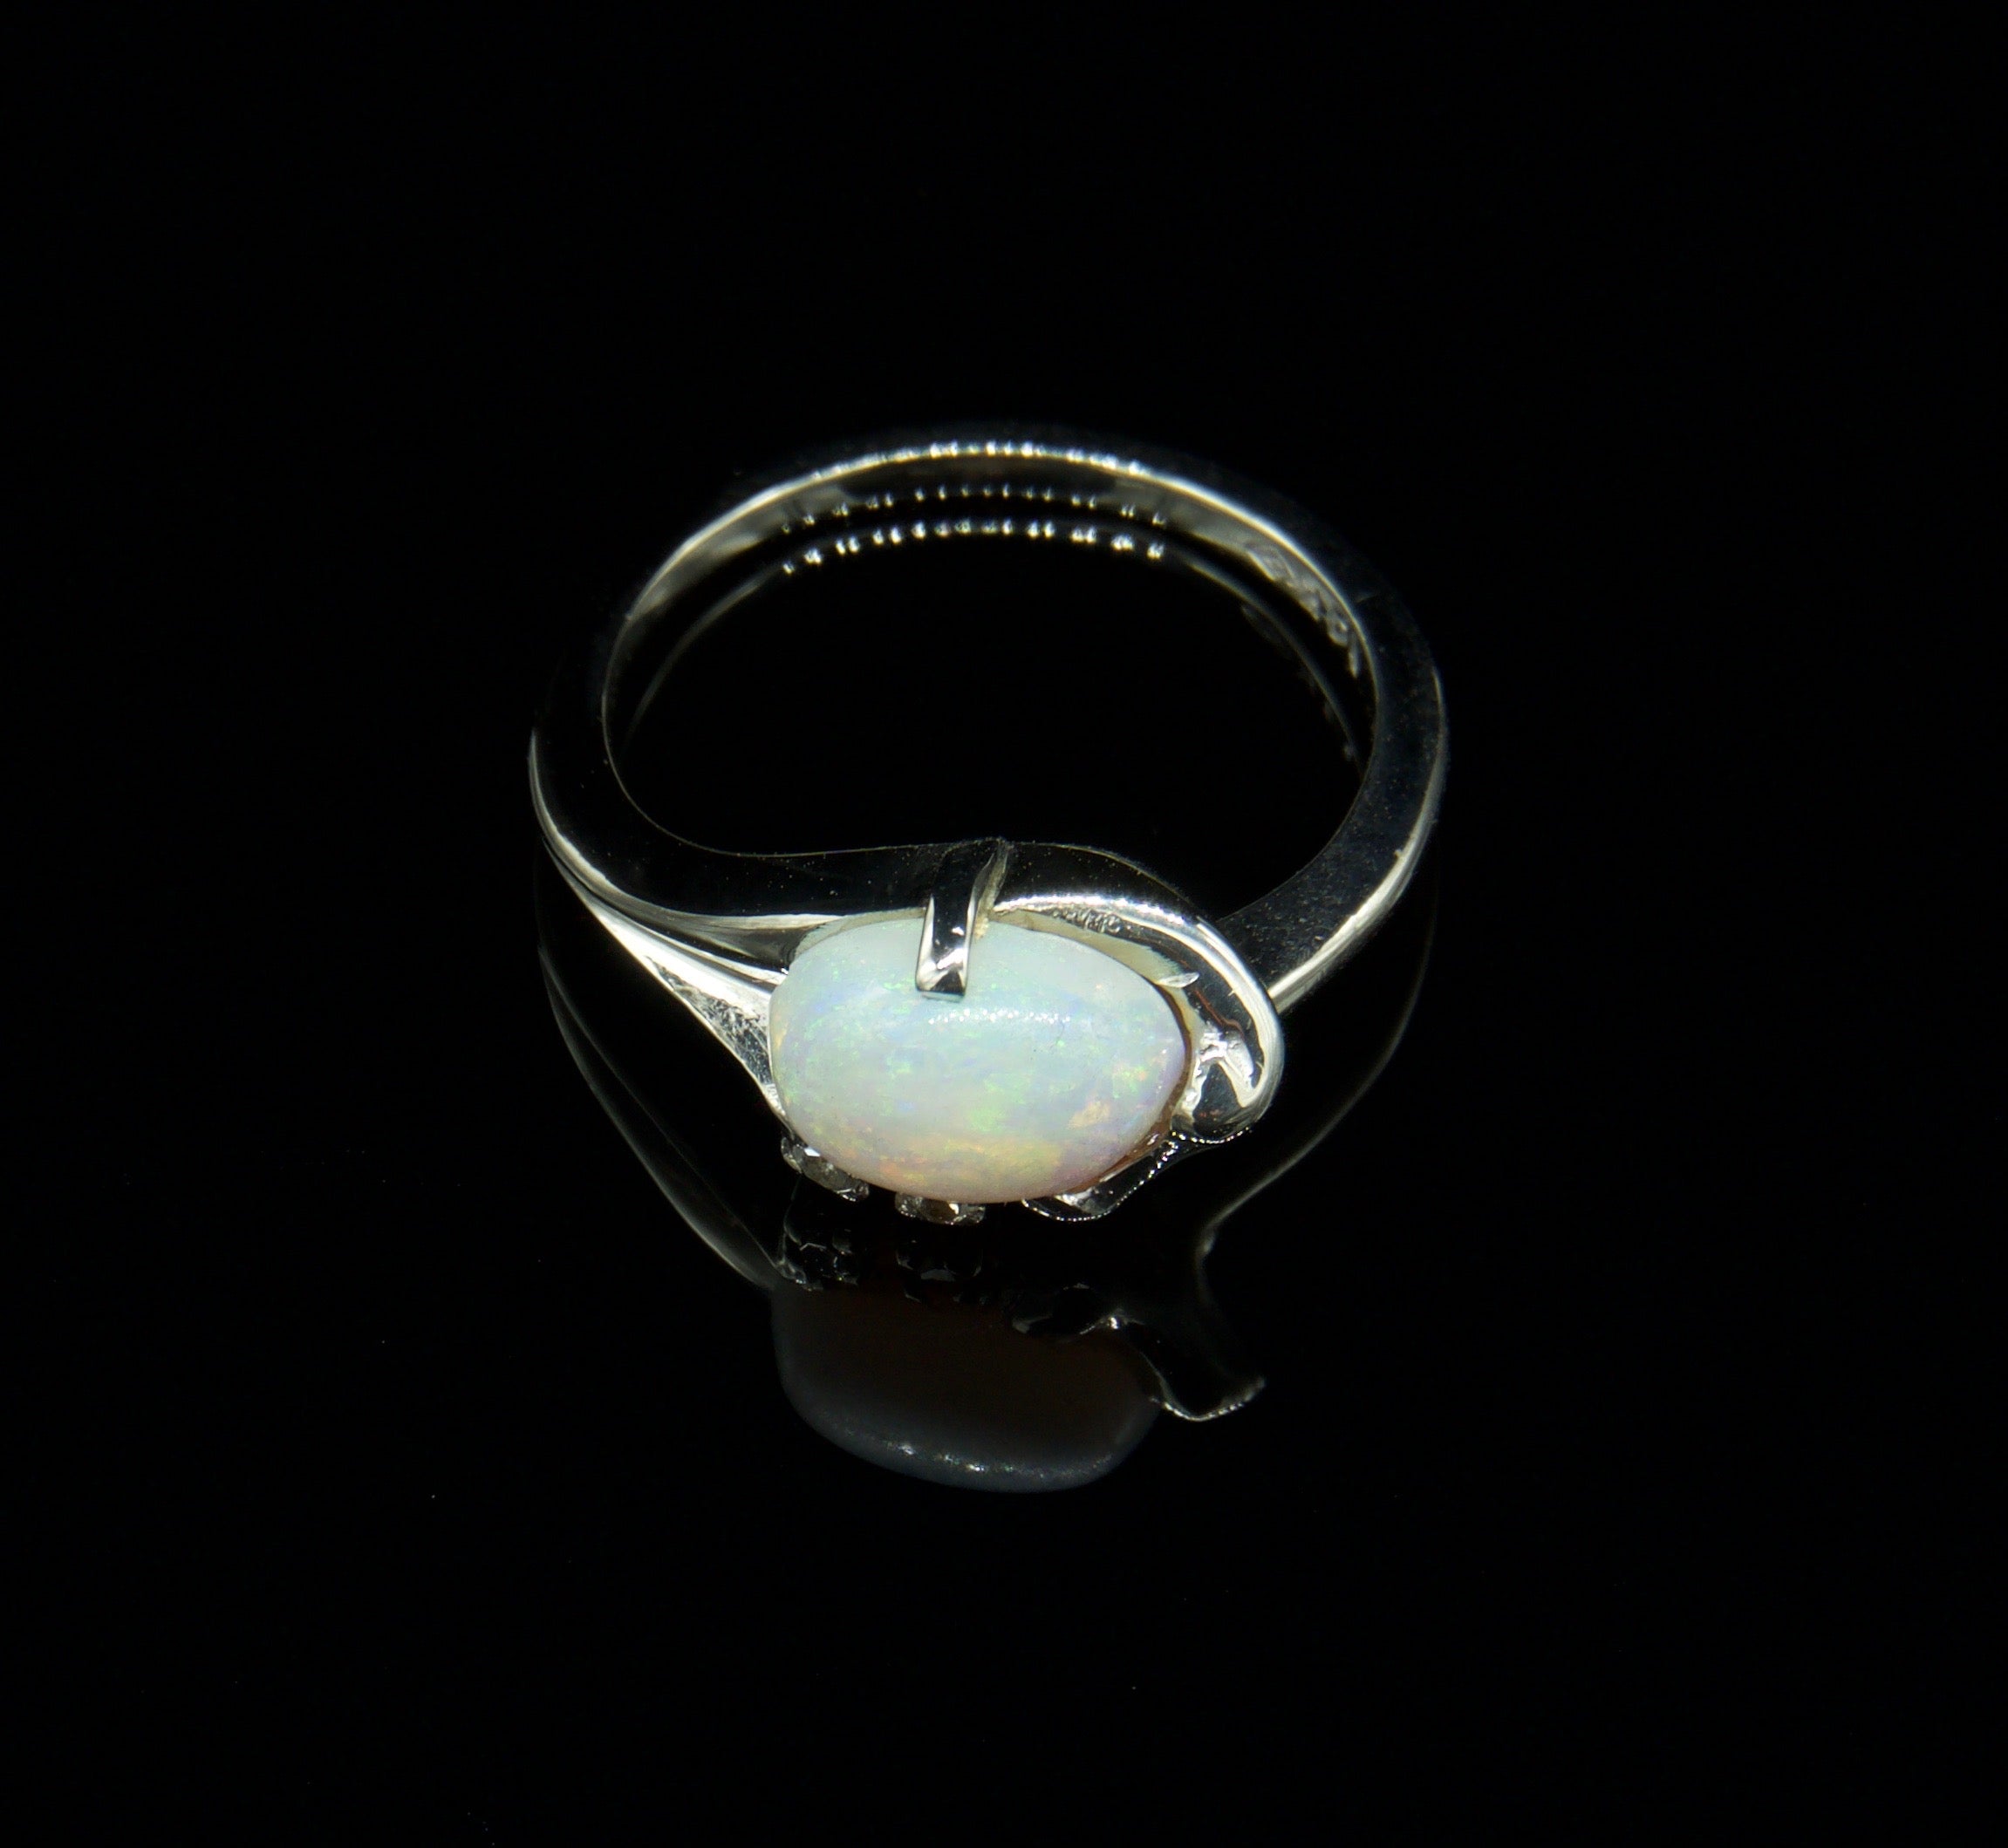 Vintage Opal and Diamond14k White Gold Ring